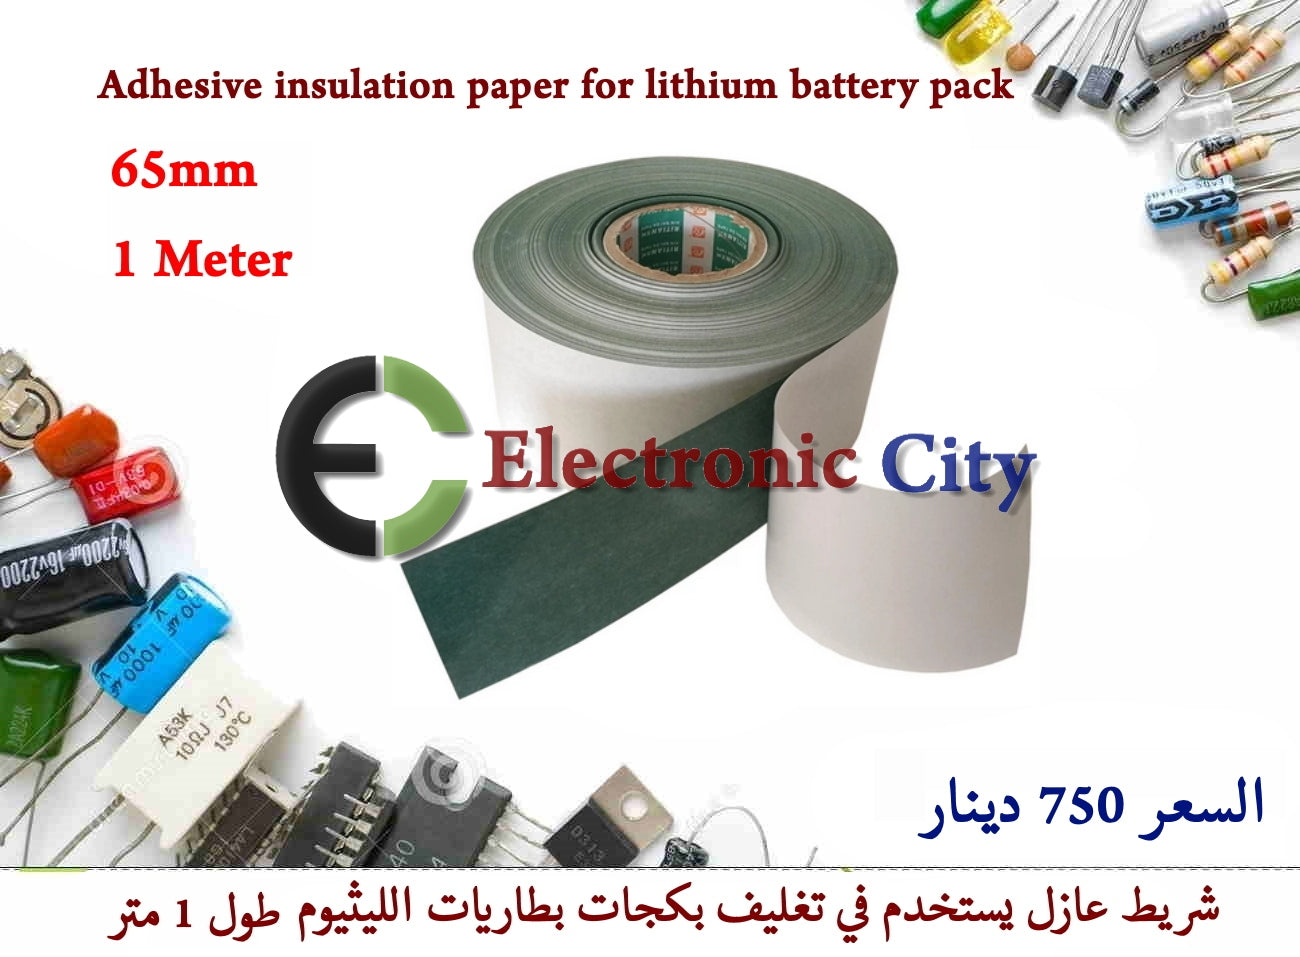 Adhesive insulation paper for lithium battery pack 65mm 1M